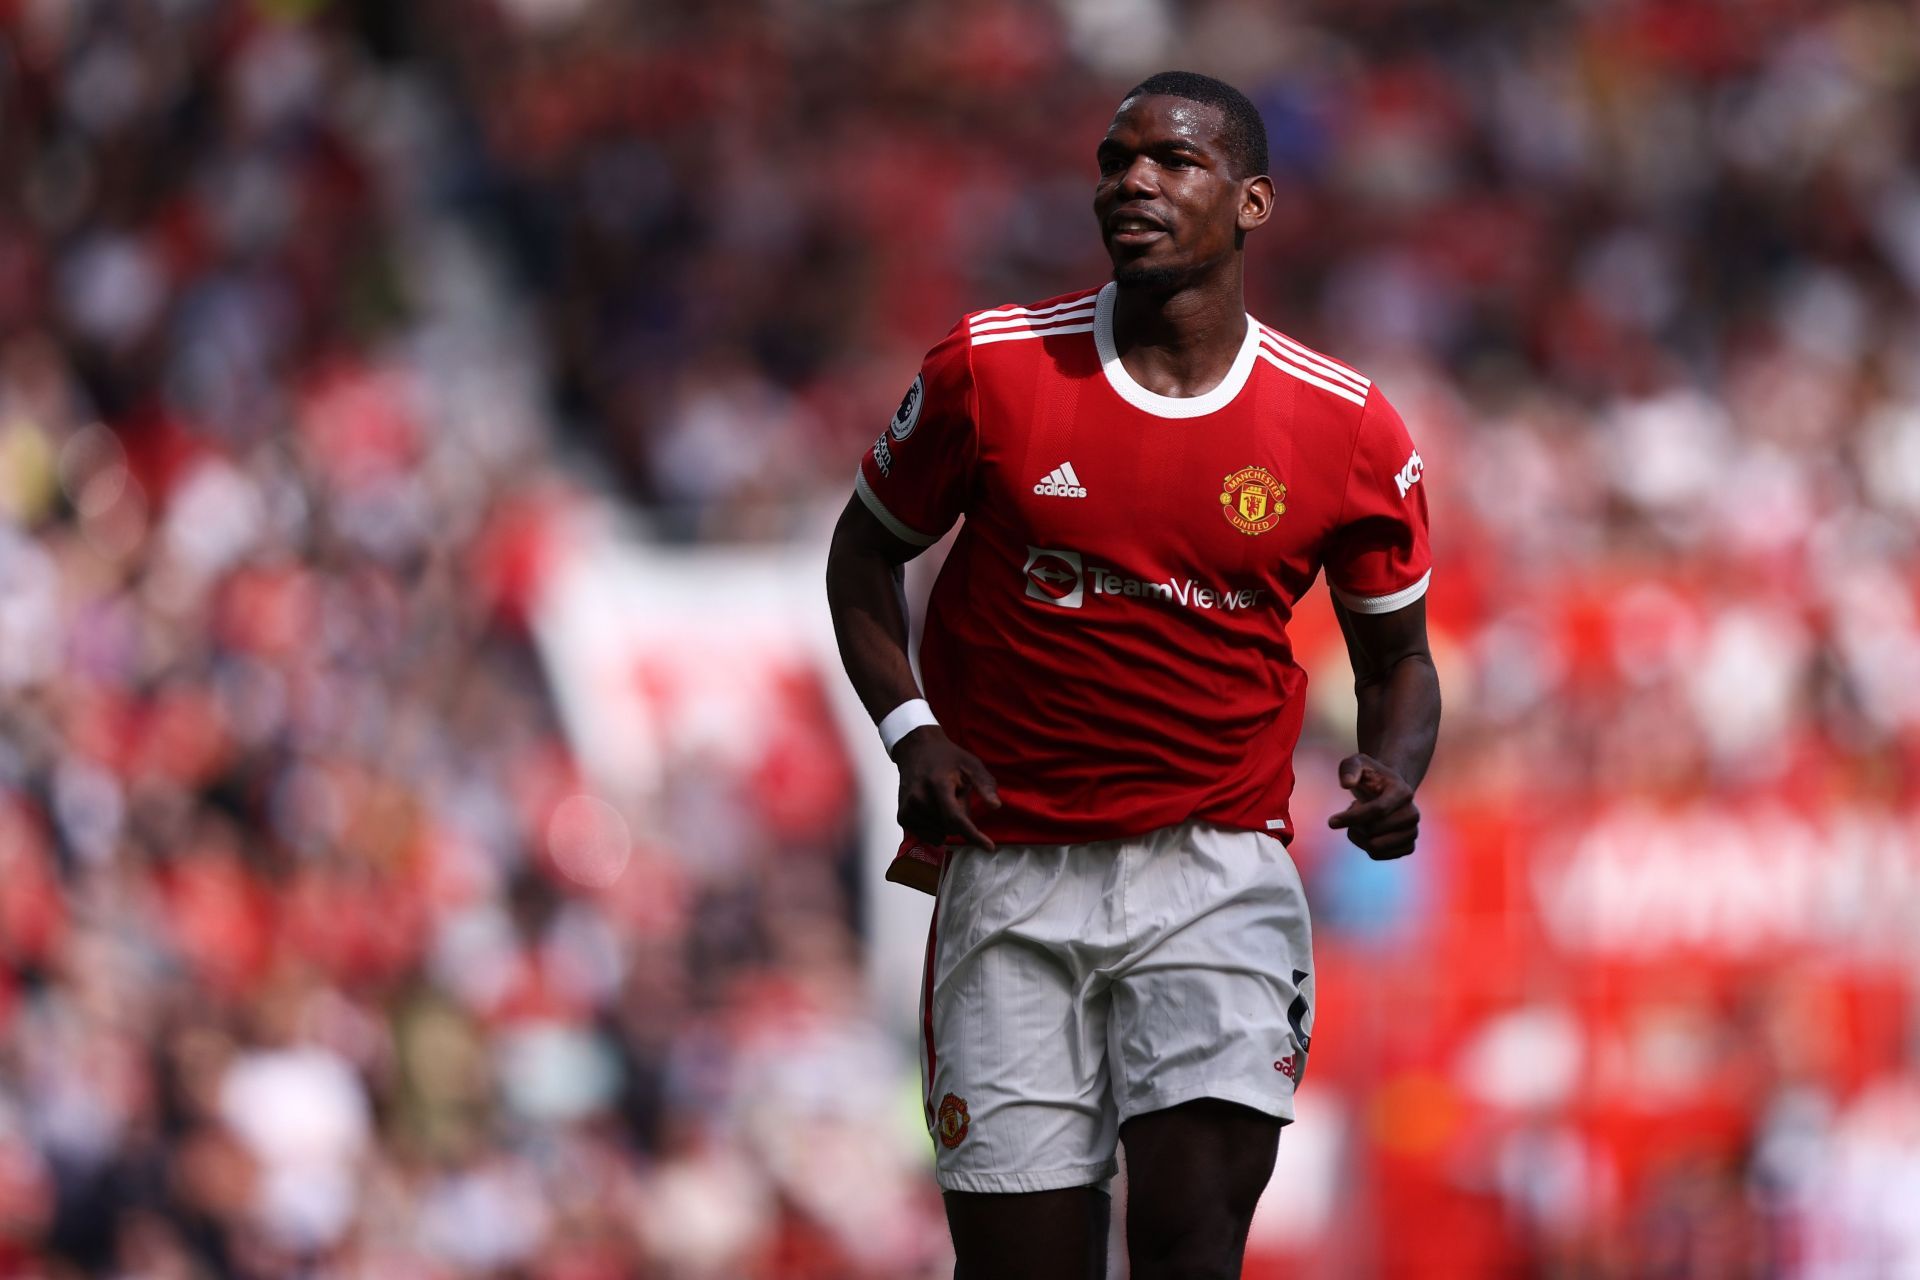 Paul Pogba could move to greener pastures this summer.